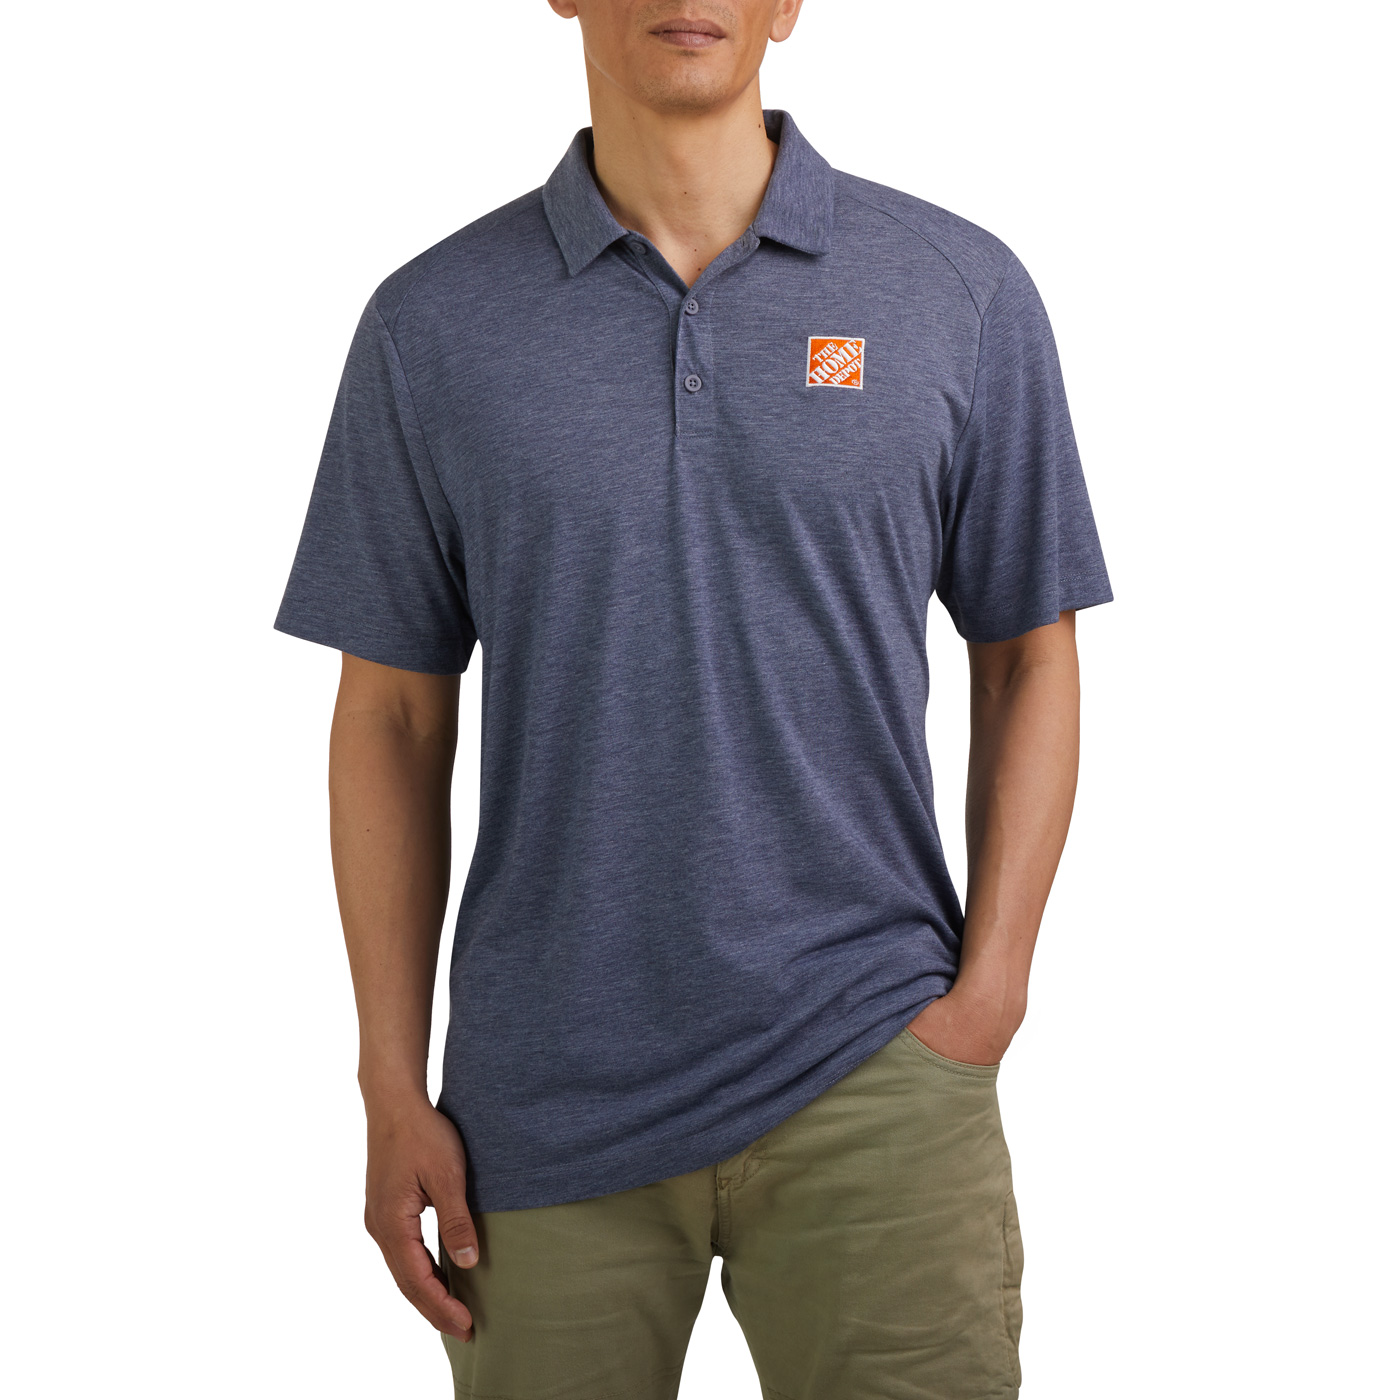 TriBlend Performance Polo THDgear